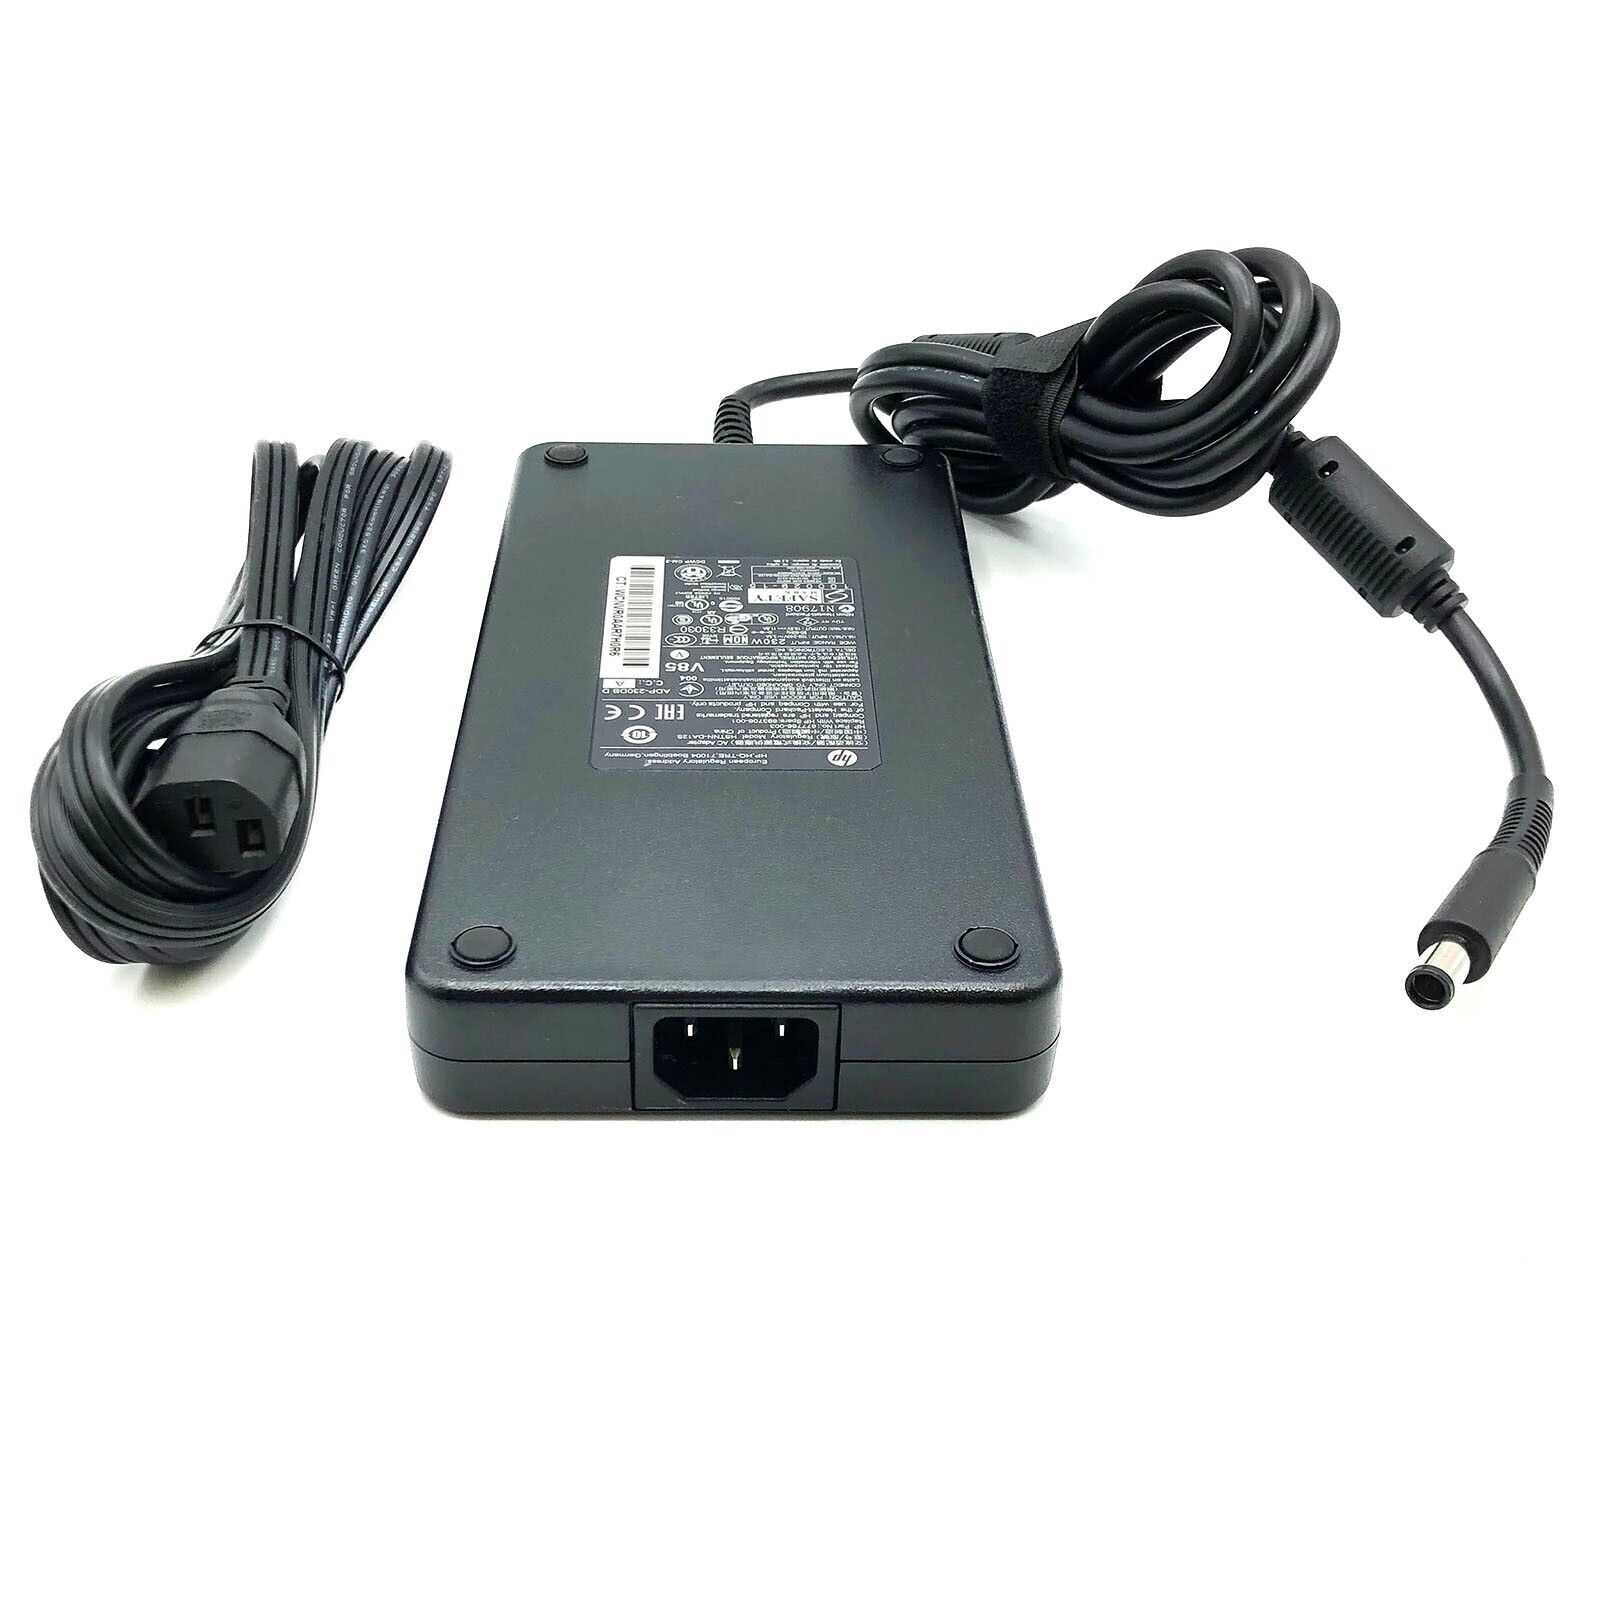 Genuine HP 230W AC DC Adapter for Z2 Mini G3 G4 Desktop PC Workstations Charger